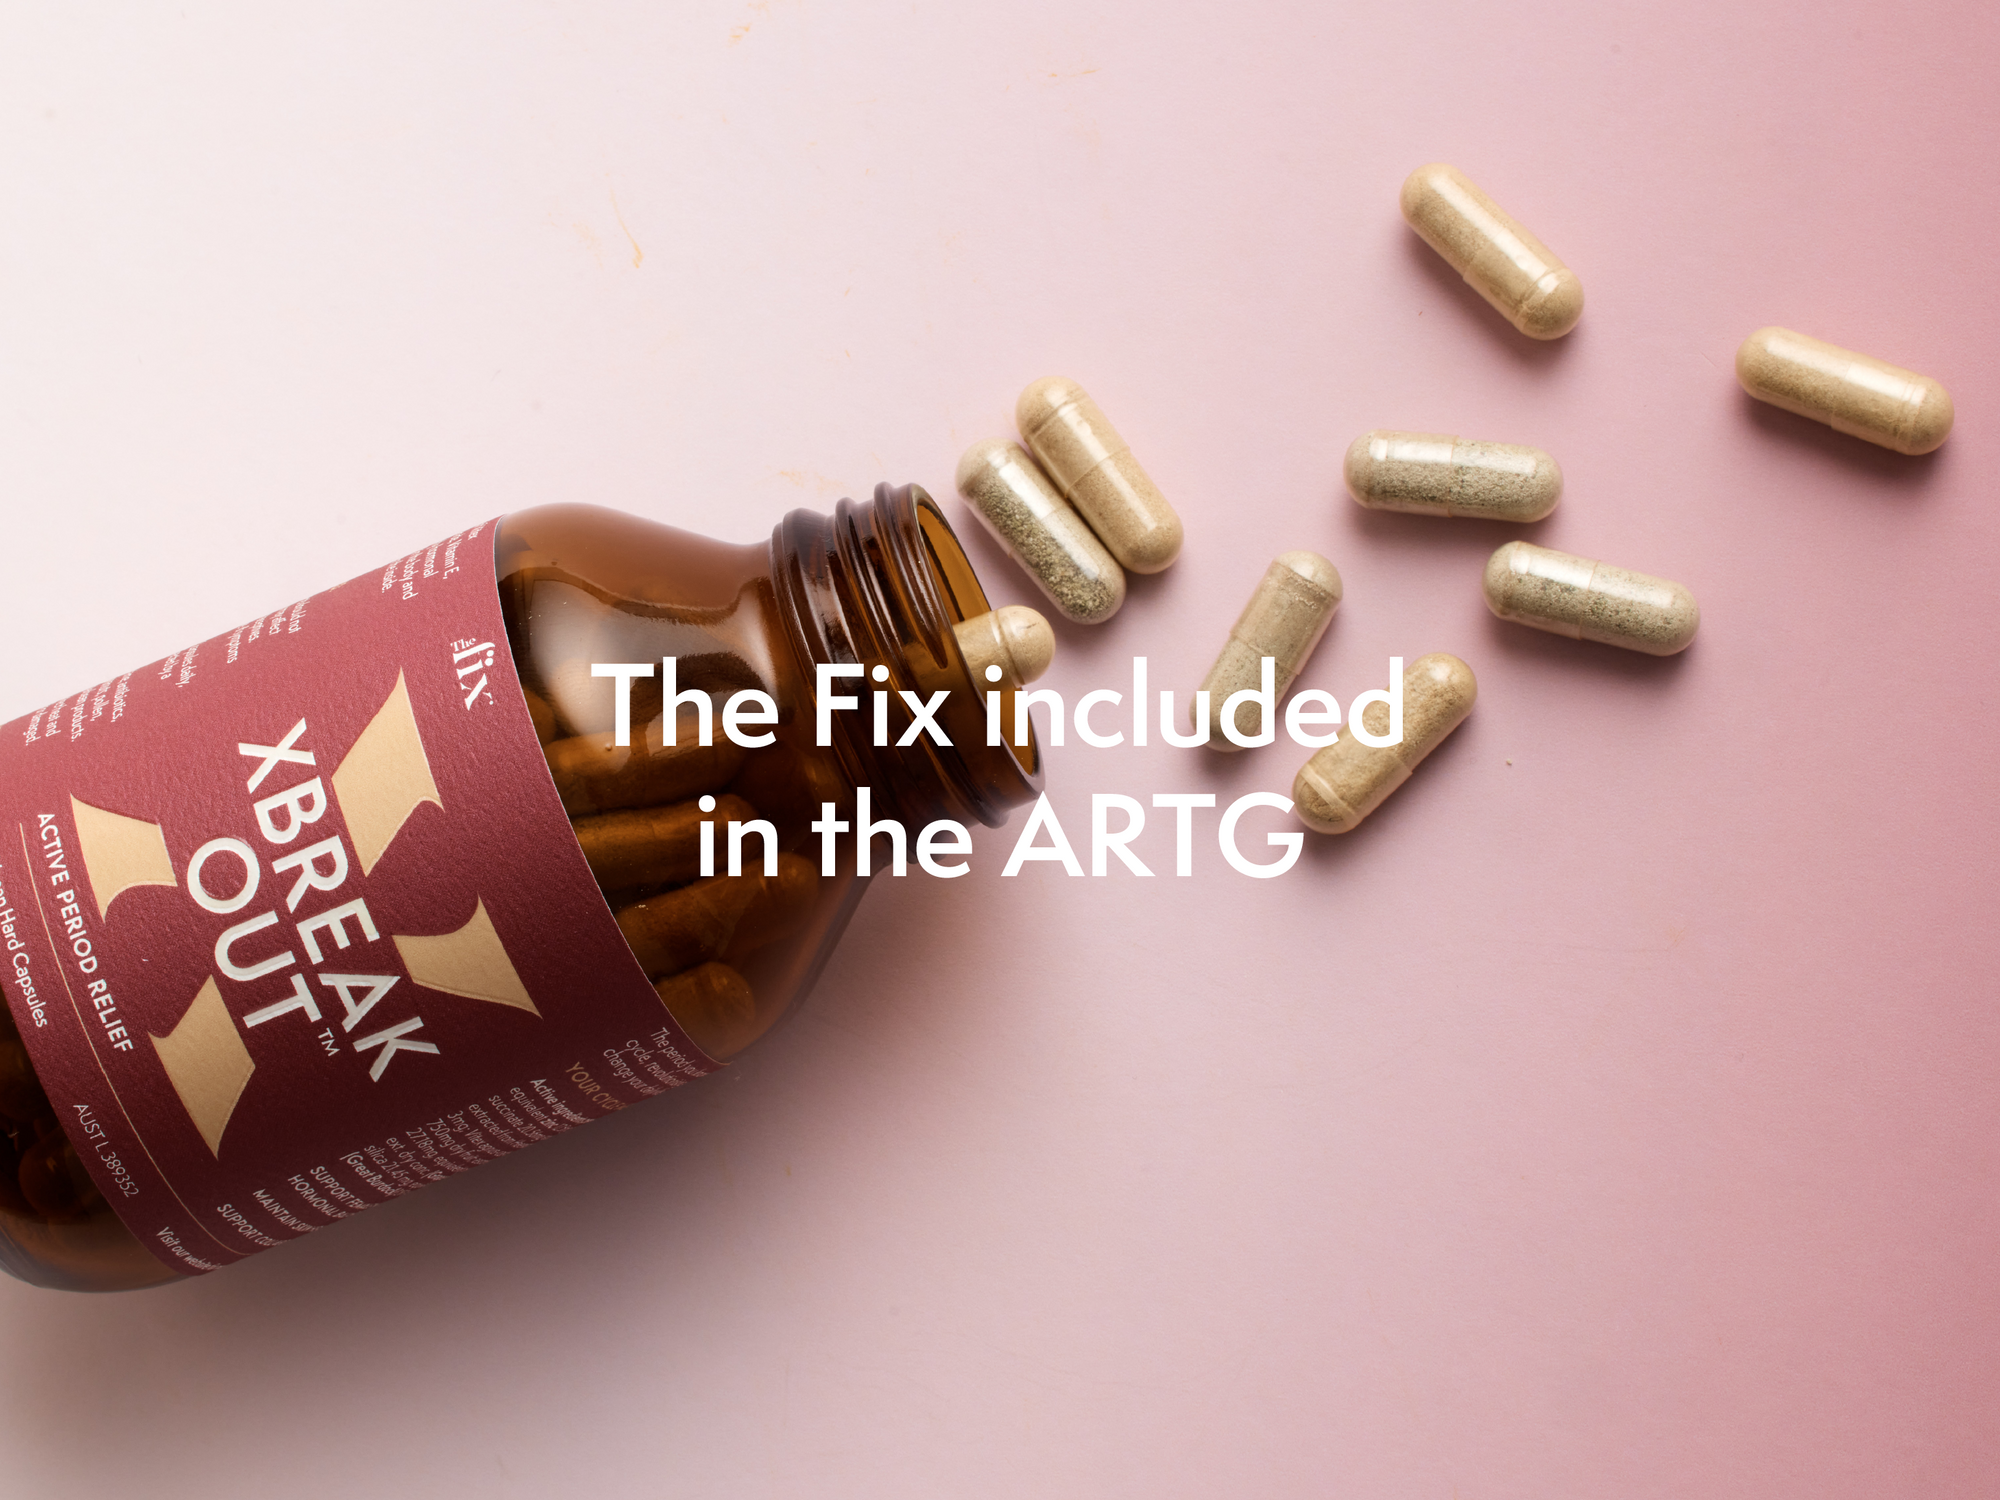 The Fix included in the ARTG